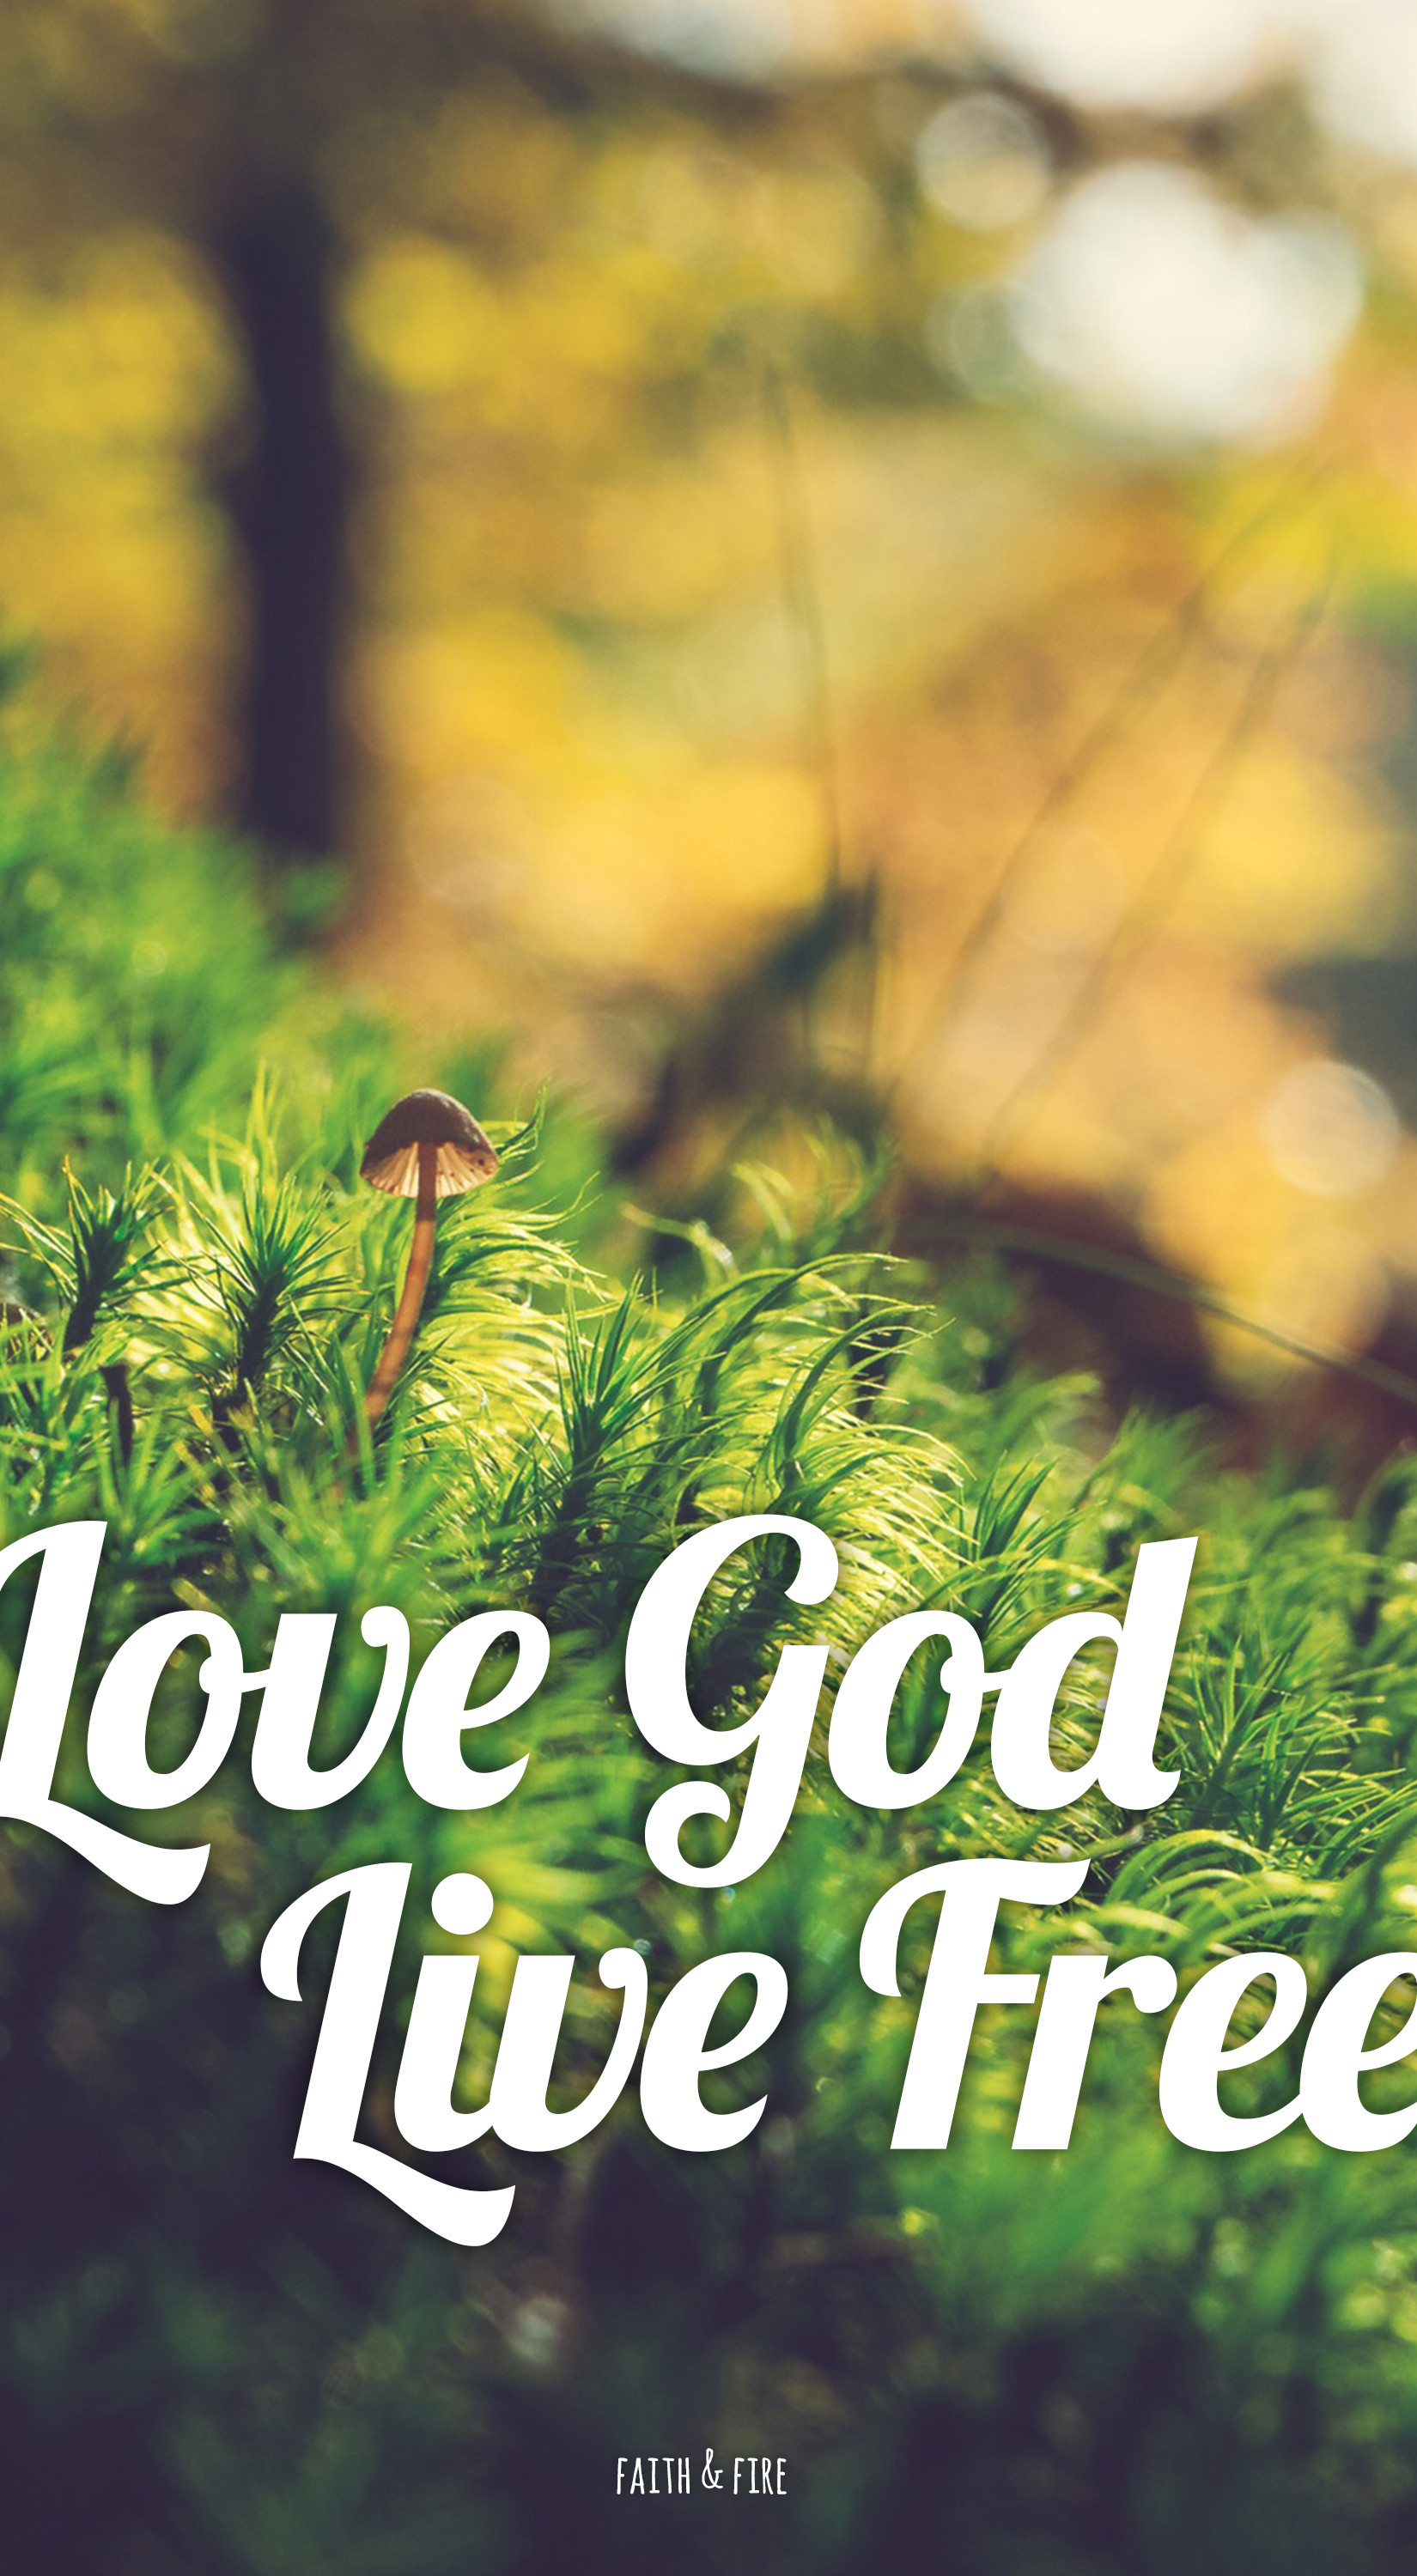 14979 God is love Vector Images  Depositphotos